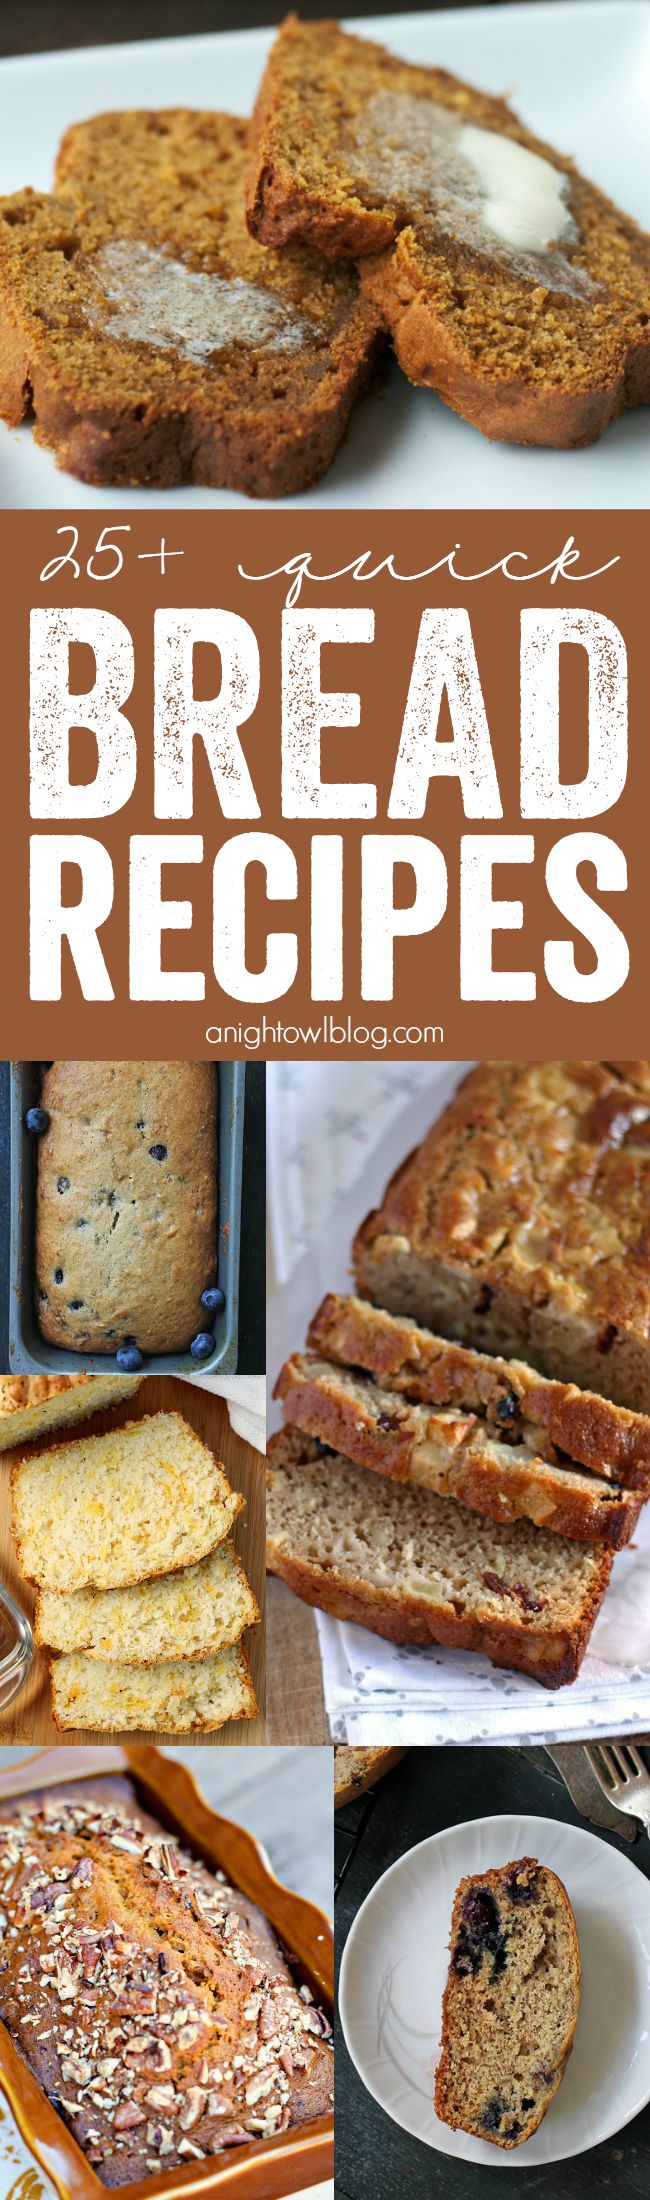 The perfect list for fall! Take your pick from this delicious list of 25+ Quick Bread Recipes, from apple to zucchini!